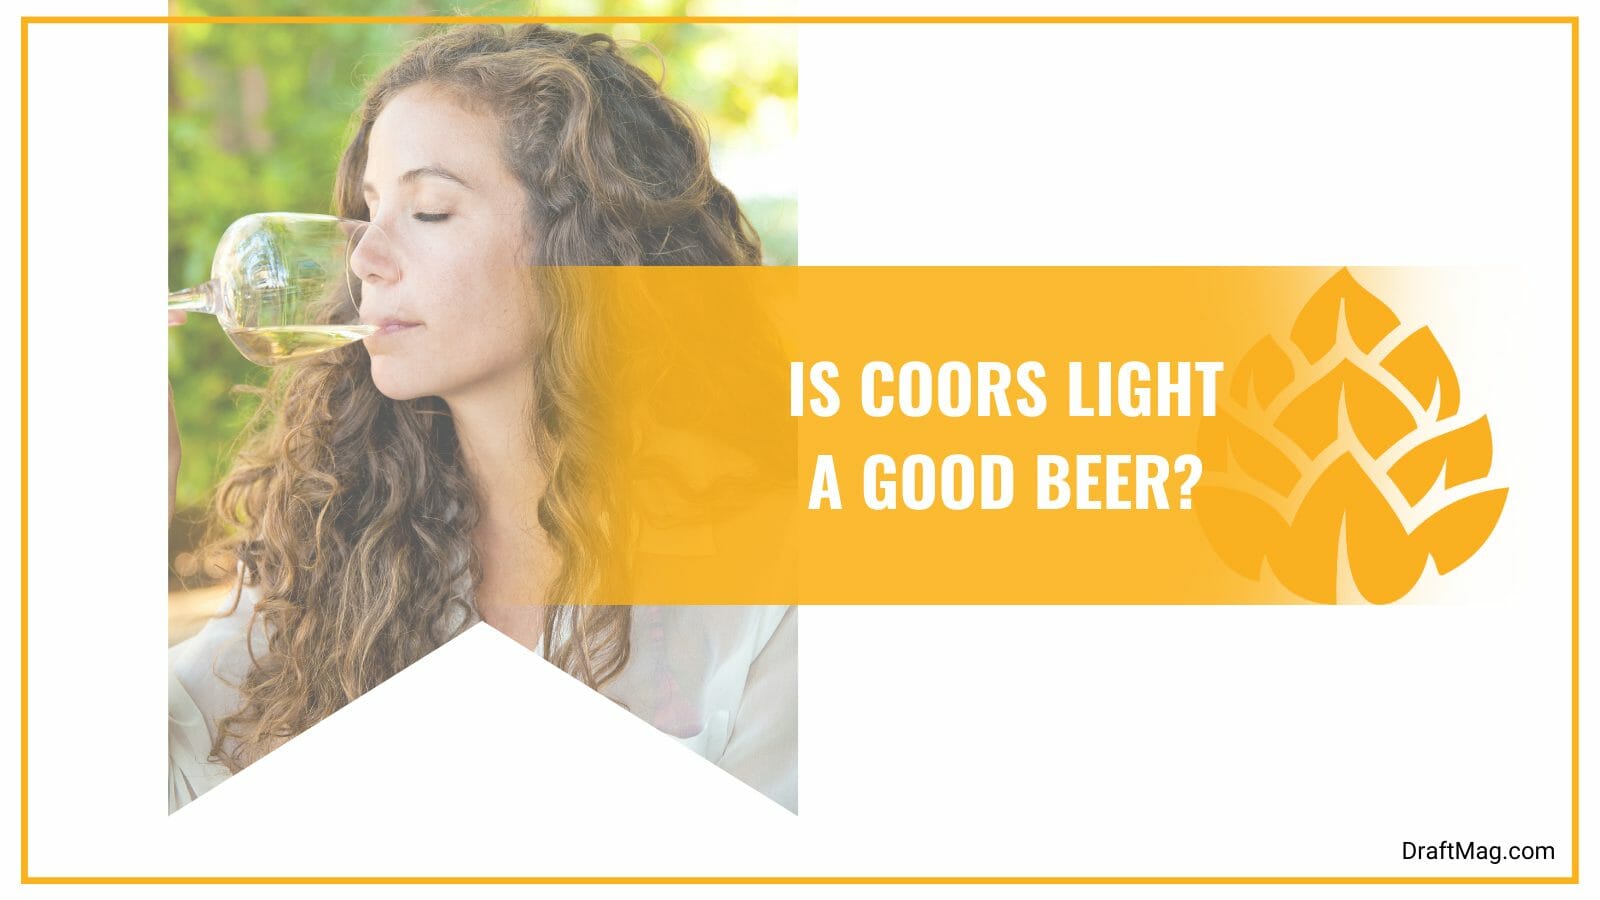 Is coors light a good beer